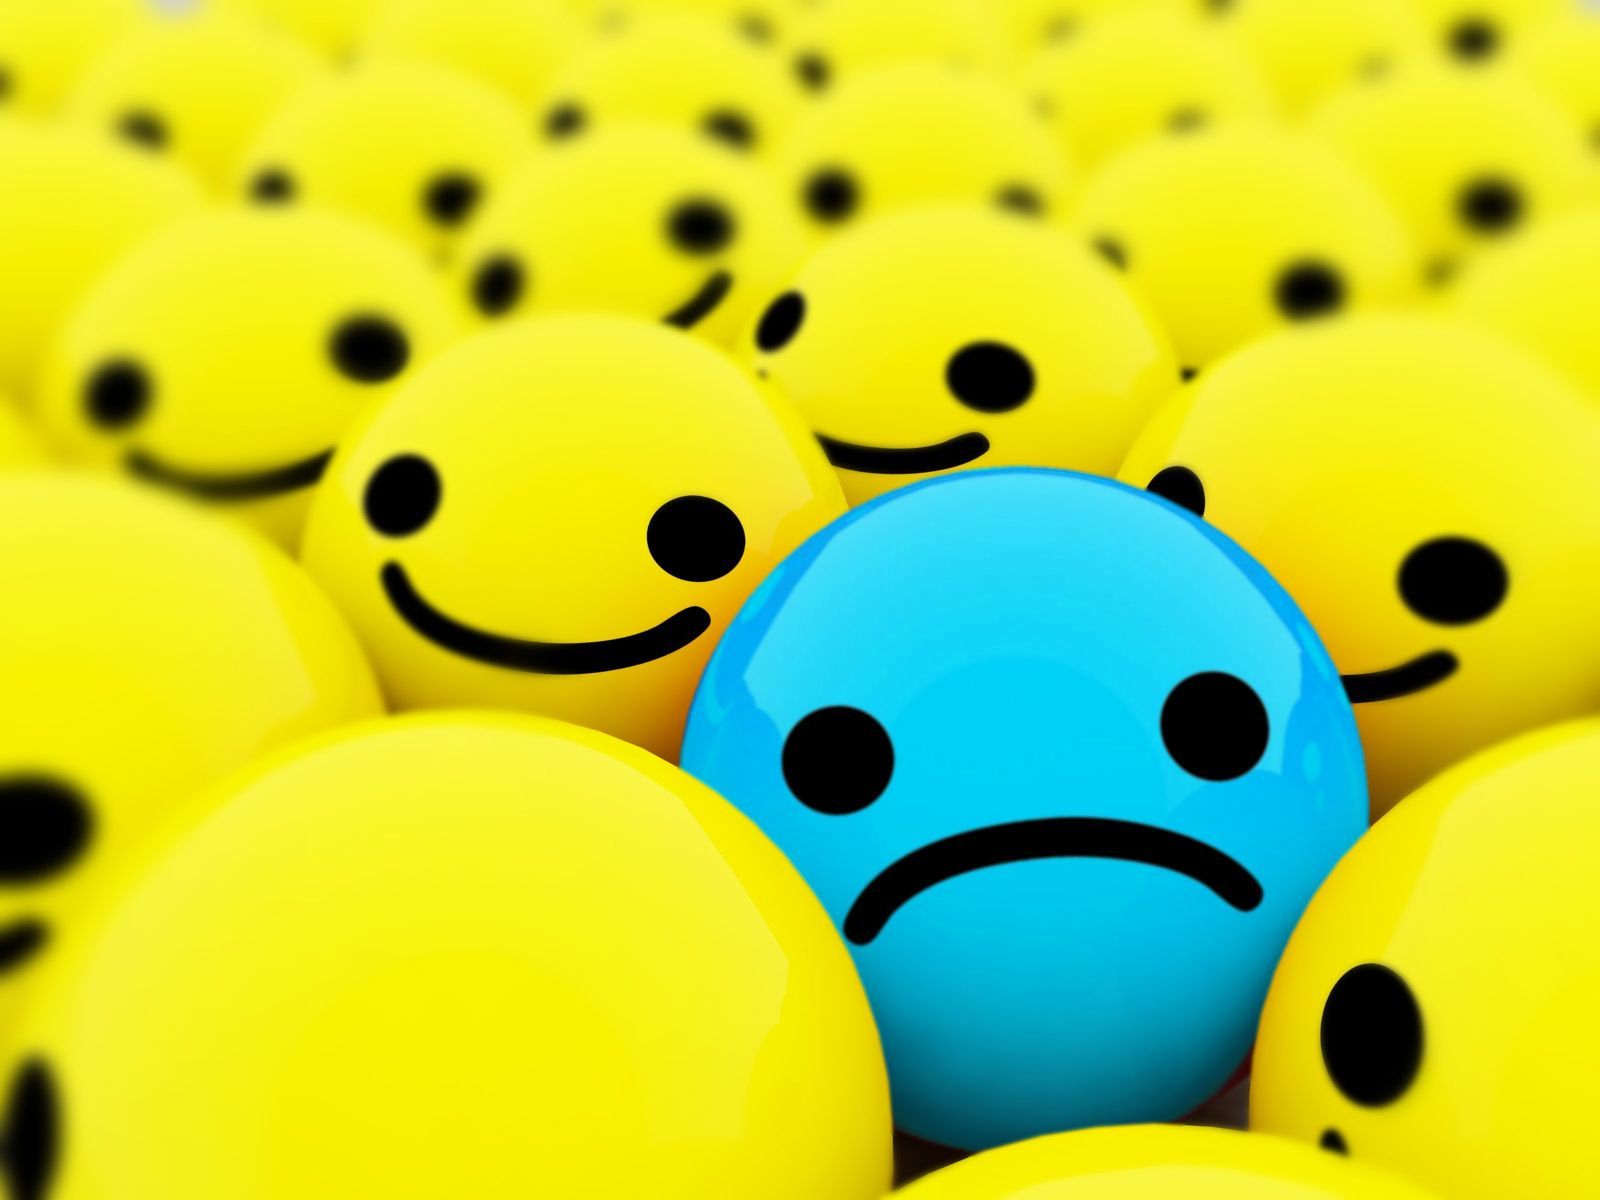 Free Sad Smiley Face With Tear, Download Free Clip Art, Free Clip